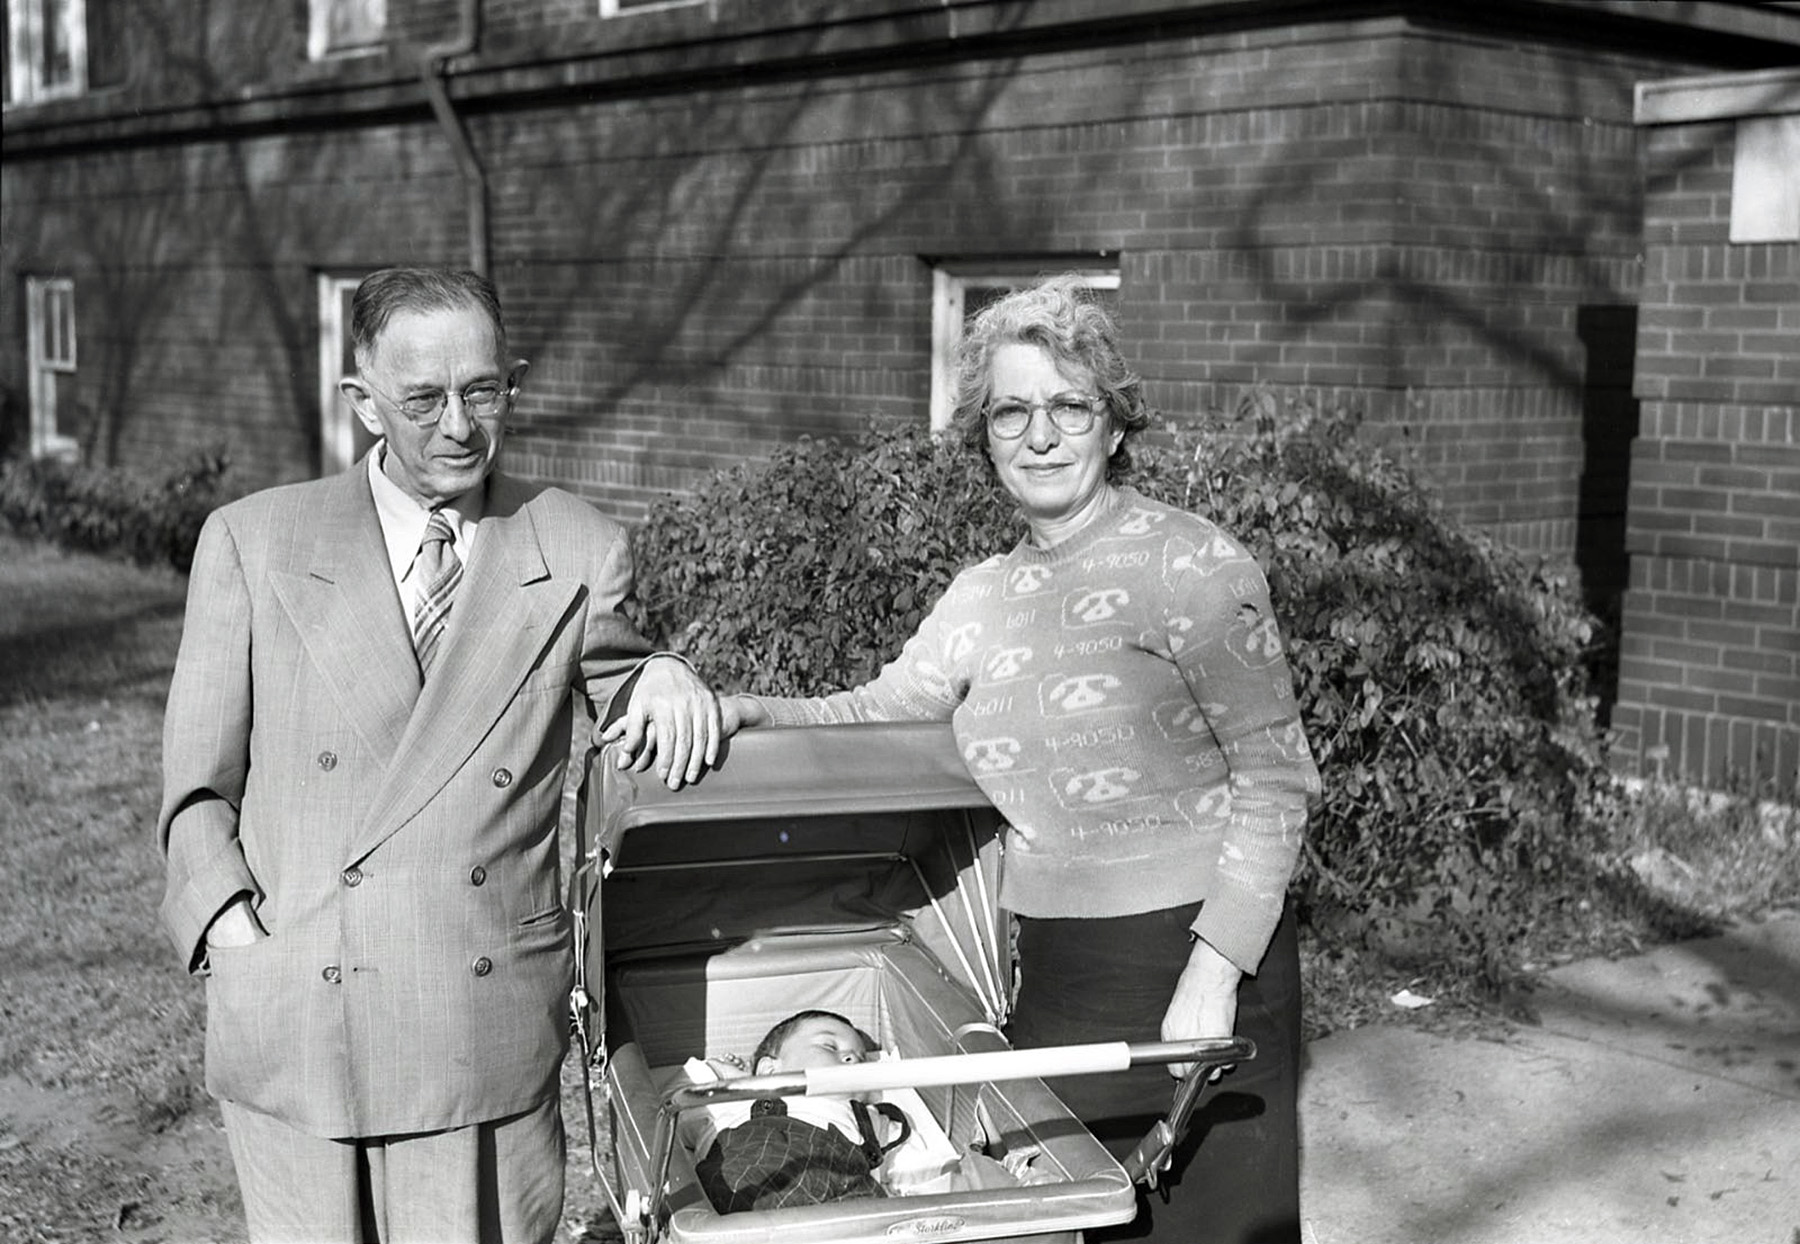 Dr. Benjamin Lurie (1894-1954) and his wife Bertha (1898-1984) were born in Russia and escaped to America to start a better life. He became a dentist and practiced in Chicago in the Humboldt Park neighborhood. Later the family moved to Albany Park and lived at 4837 N. Albany Ave with their two daughters Mildred (b. 1924) and Louise (1933-2014).

This photograph of Dr. Lurie and his wife with their first grandson Steven (b. 1952) was taken about 1953. Tragically, Dr. Lurie died on June 20, 1954.

These fine people were my maternal grandparents. View full size.